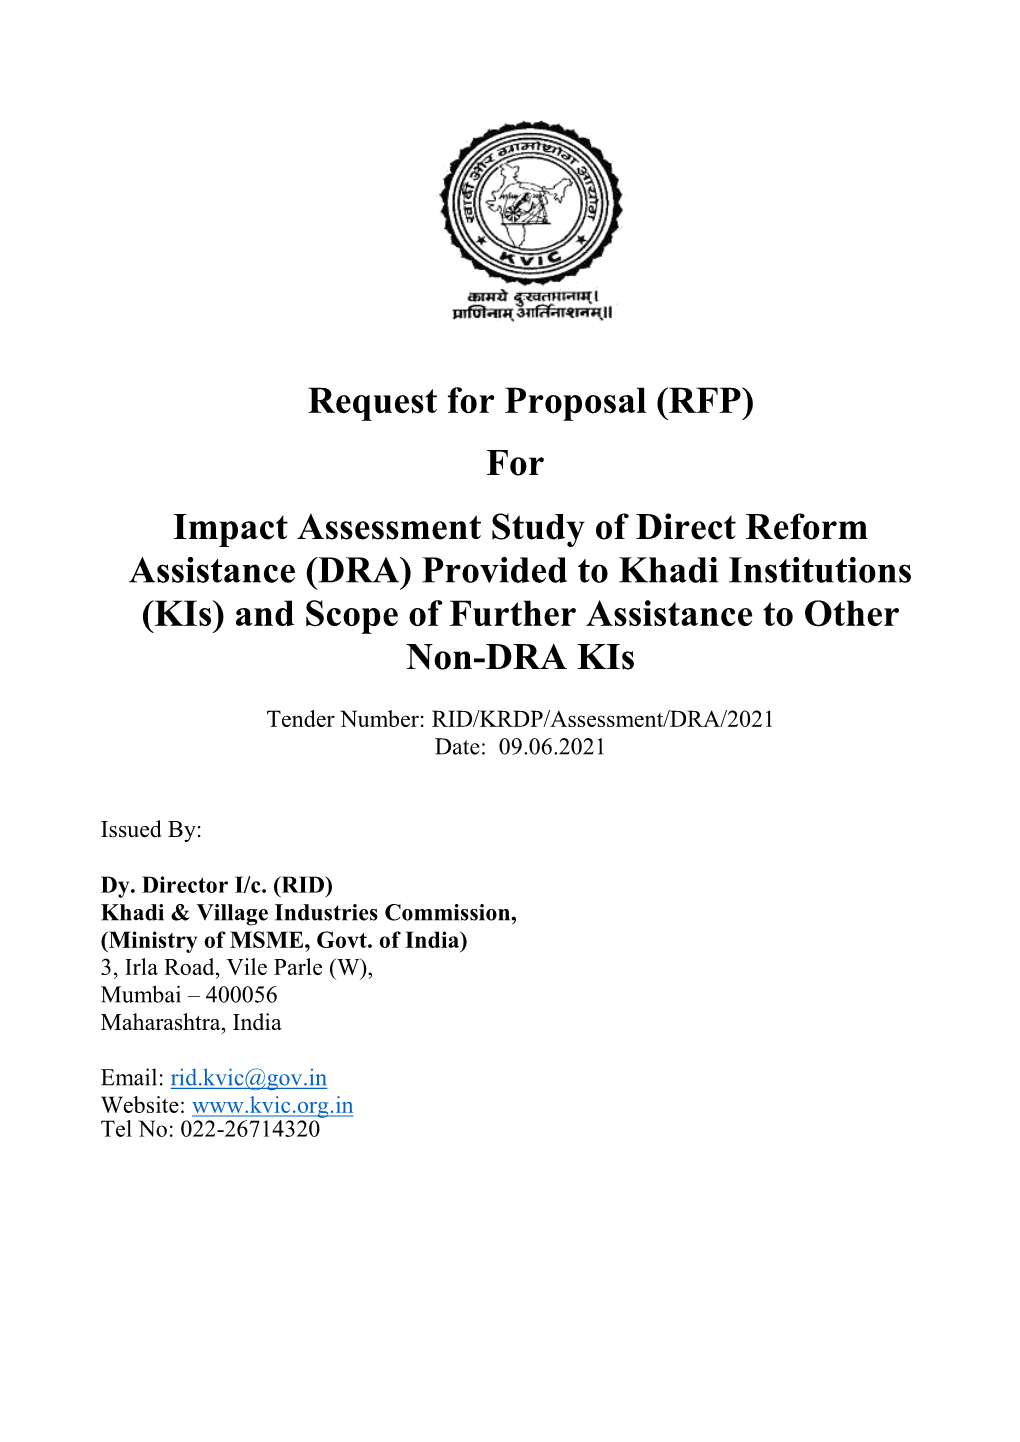 RFP) for Impact Assessment Study of Direct Reform Assistance (DRA) Provided to Khadi Institutions (Kis) and Scope of Further Assistance to Other Non-DRA Kis